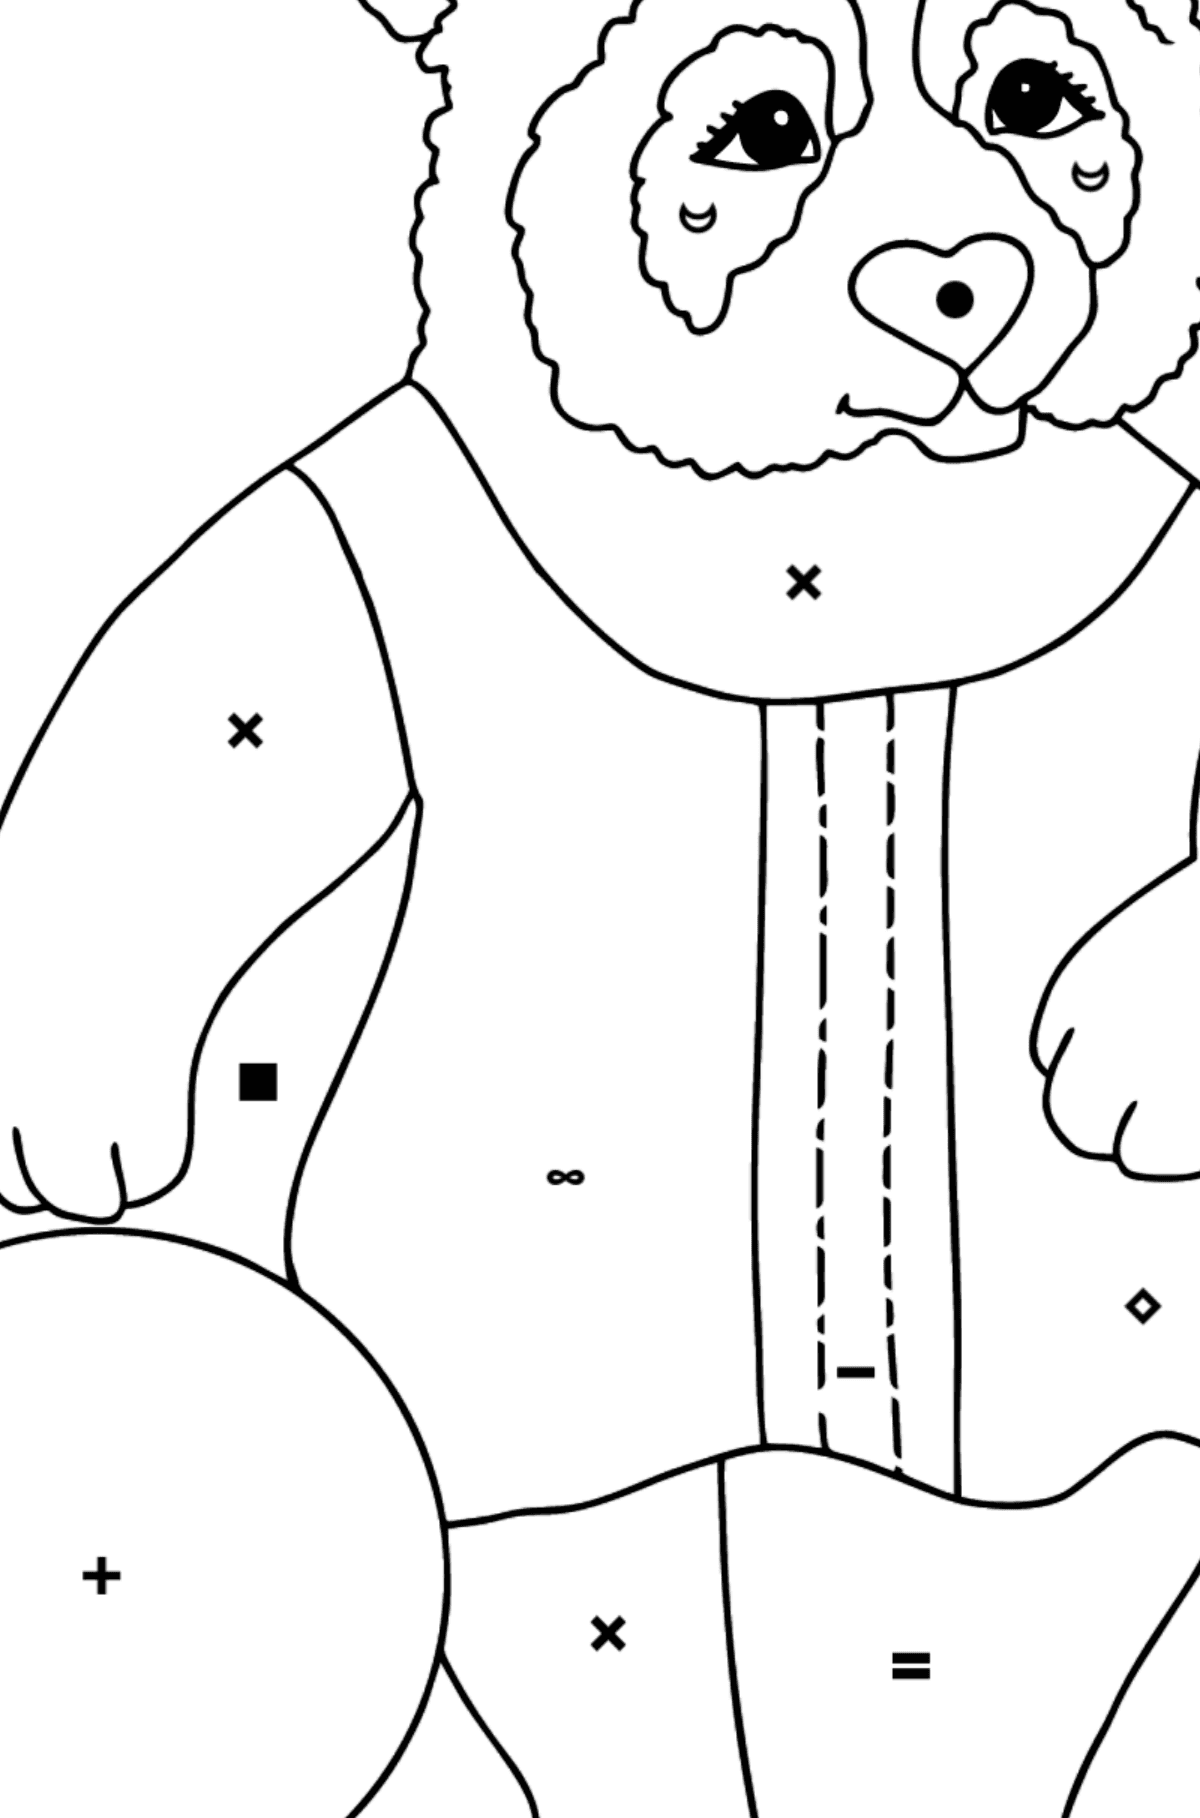 Panda For Babies coloring page - Coloring by Symbols for Kids